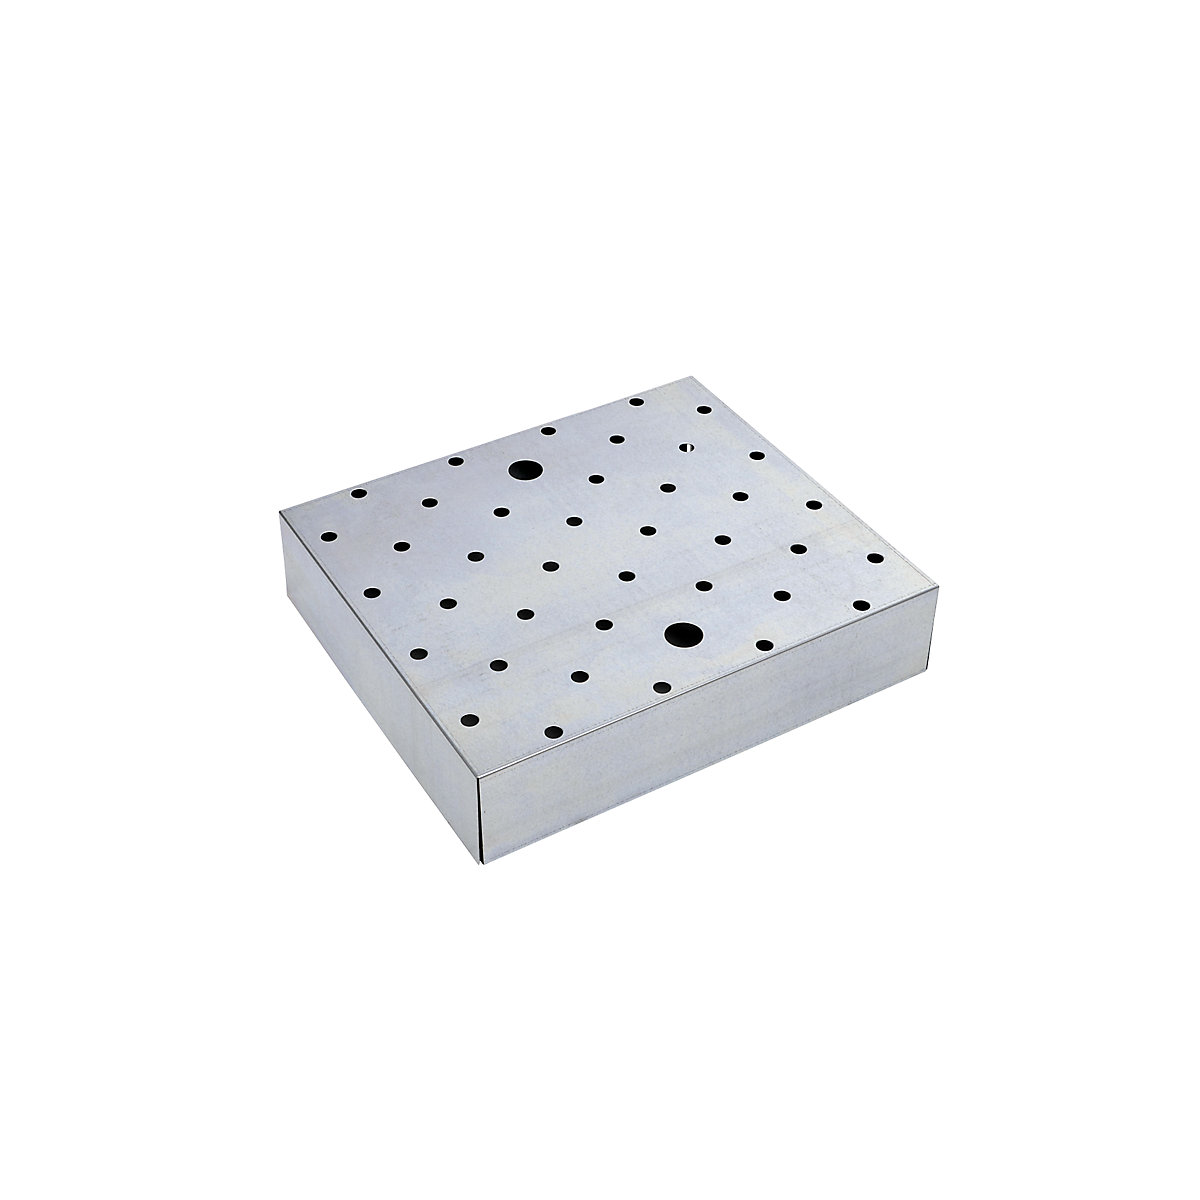 Perforated metal cover – eurokraft pro